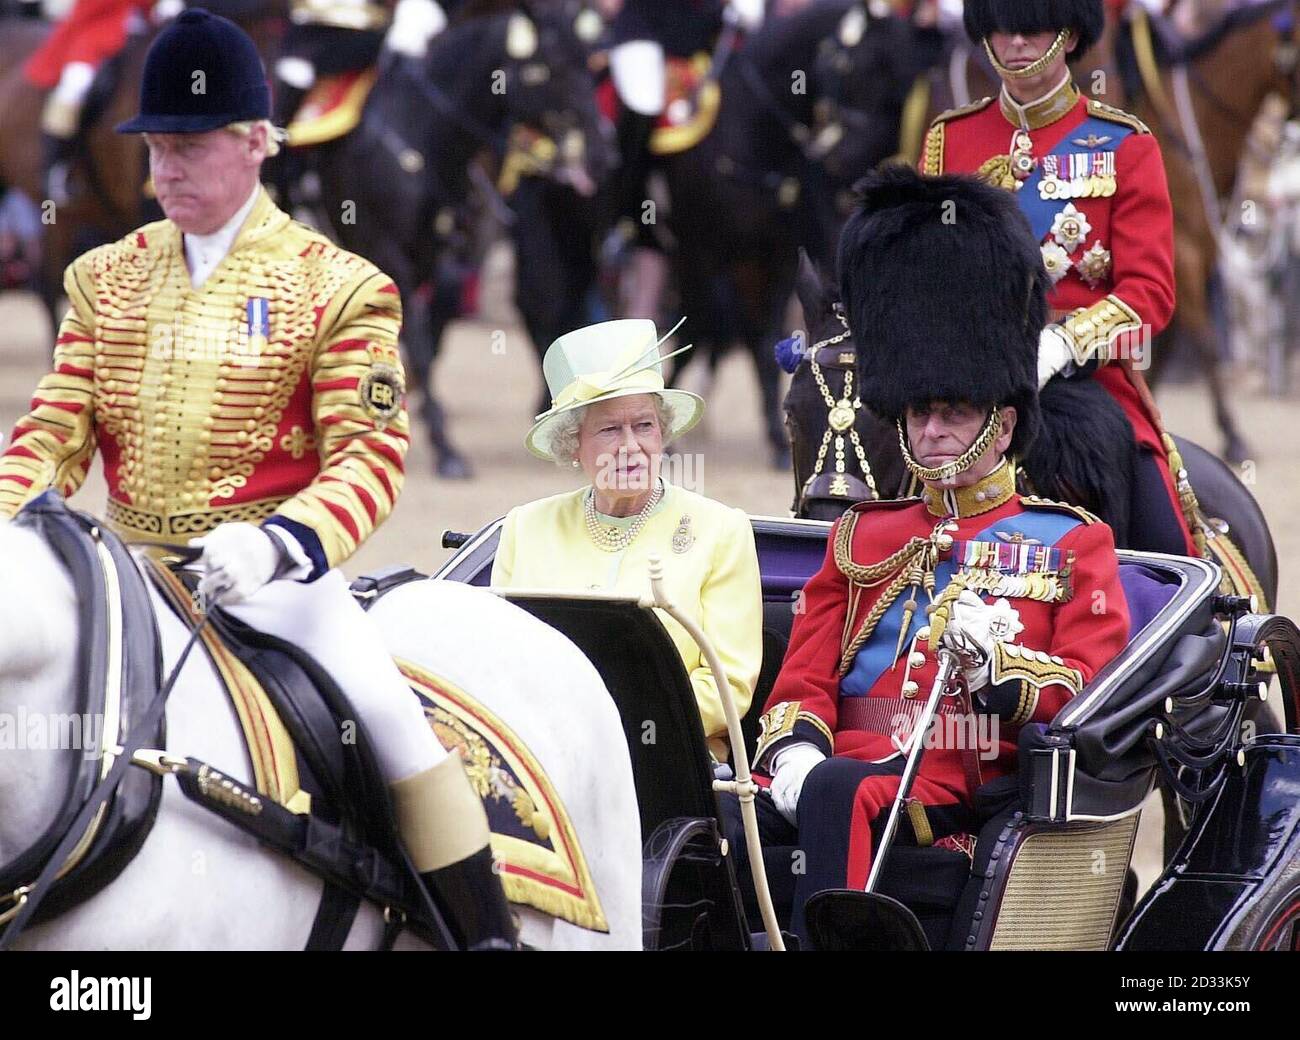 Britain's Queen Elizabeth II arrives at the Horse Guards accompanied by the Duke of Edinburgh for the Trooping the Colour ceremony in London. Stock Photo